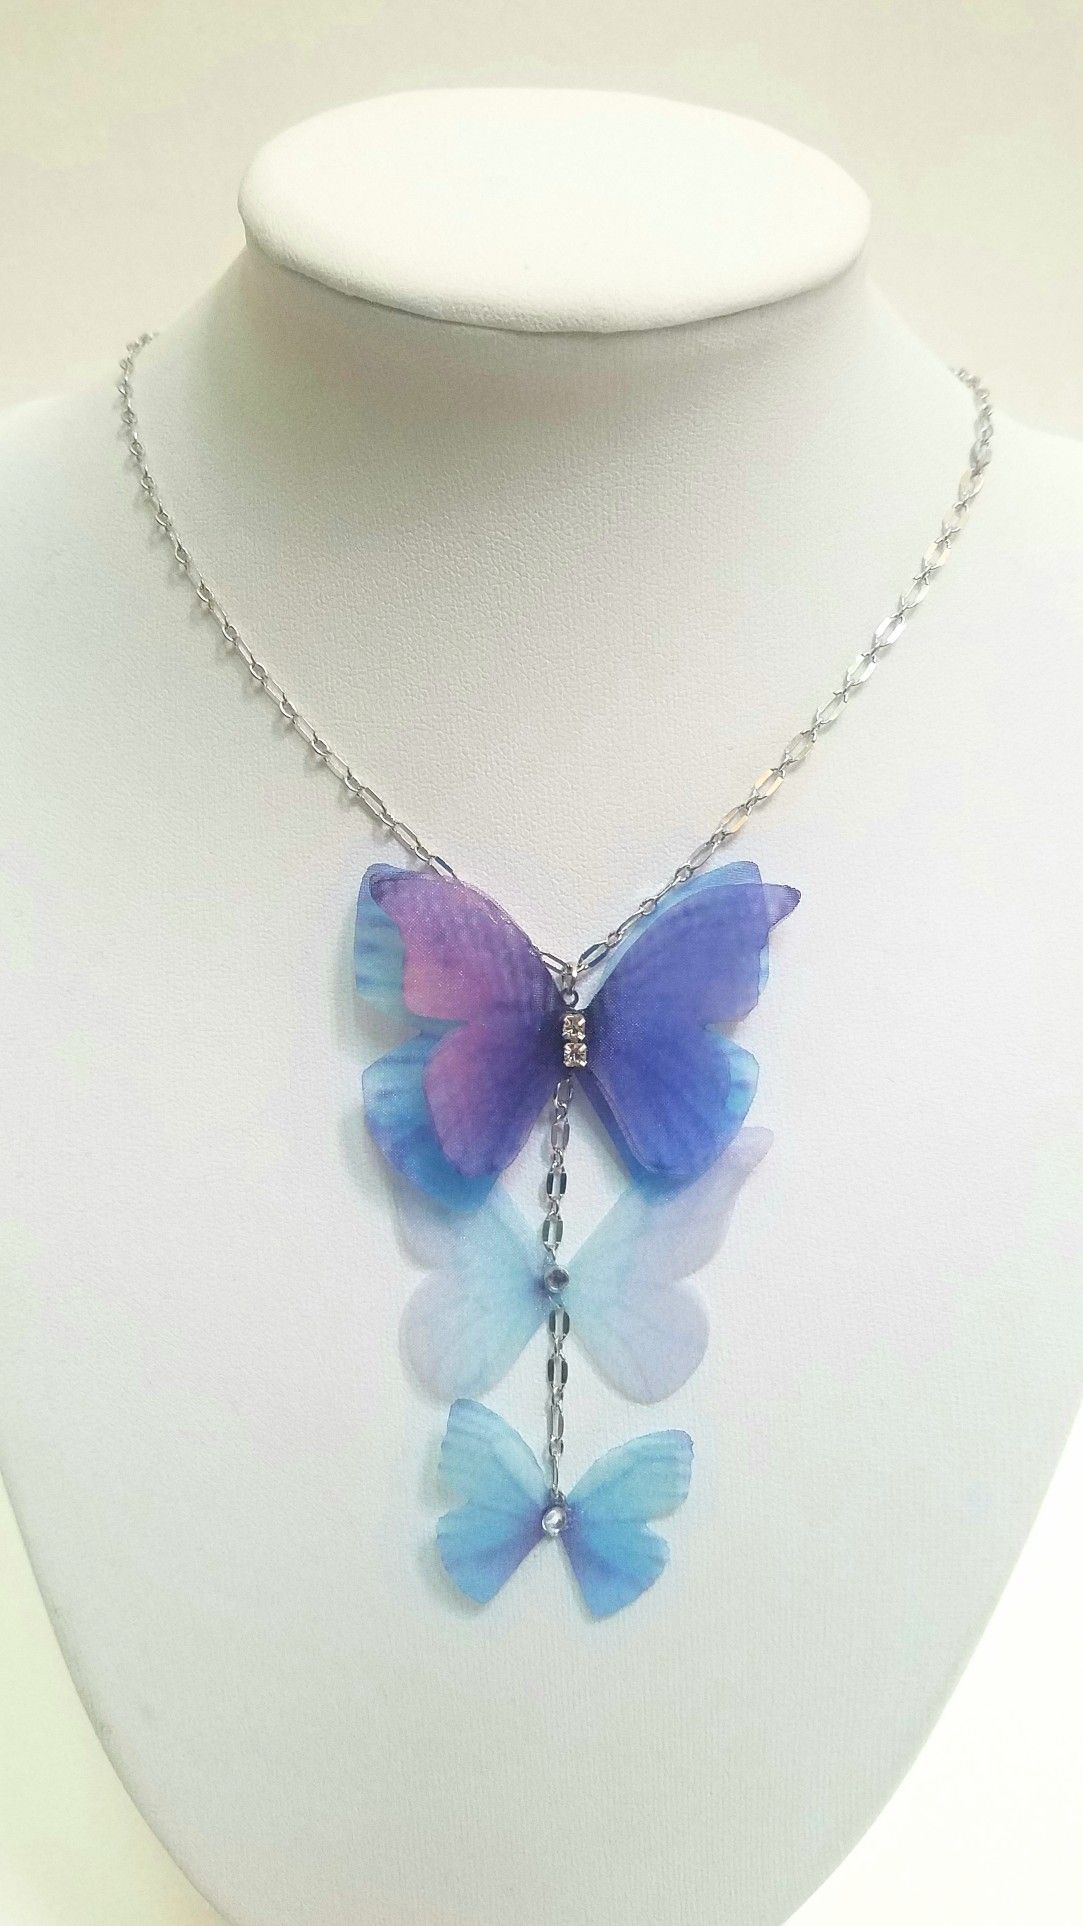 handmade butterfly necklace, art by Sherrie Thai of Shaireproductions.com